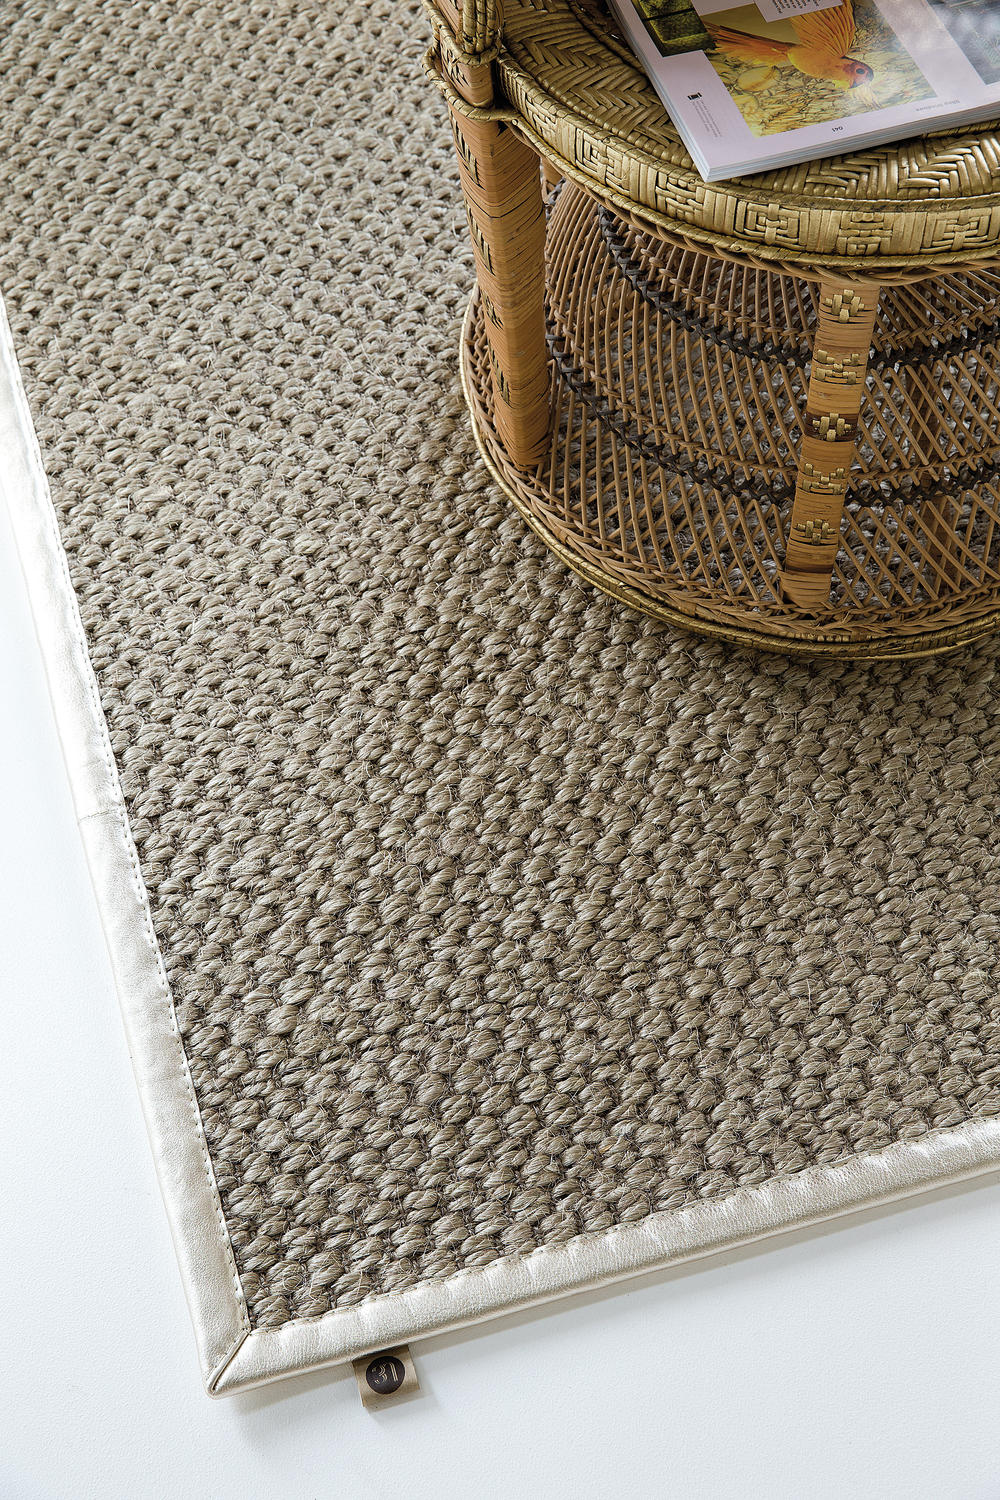 Limited Edition Zoulou sisal area rug